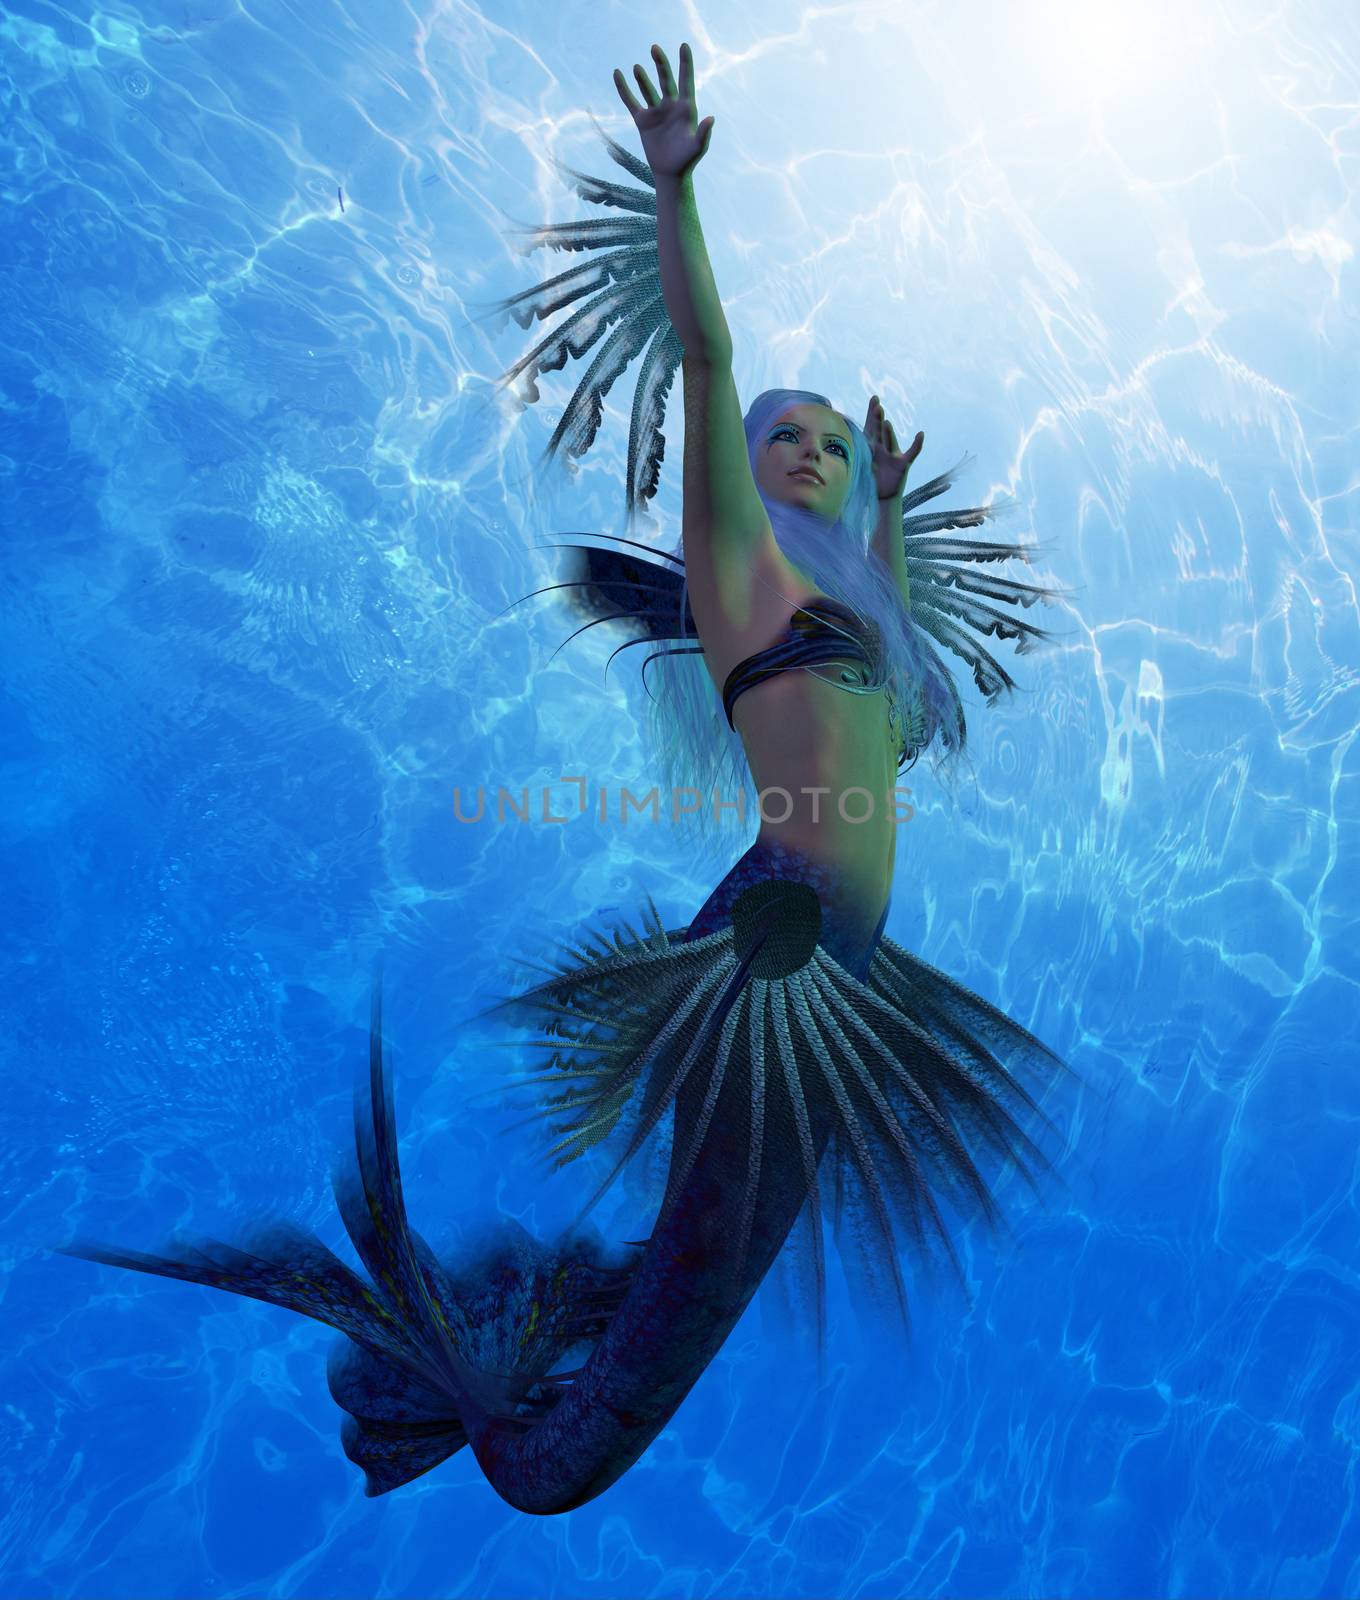 A mermaid is a fantasy creature from folklore and myth that has a fish tail and a woman's upper body.